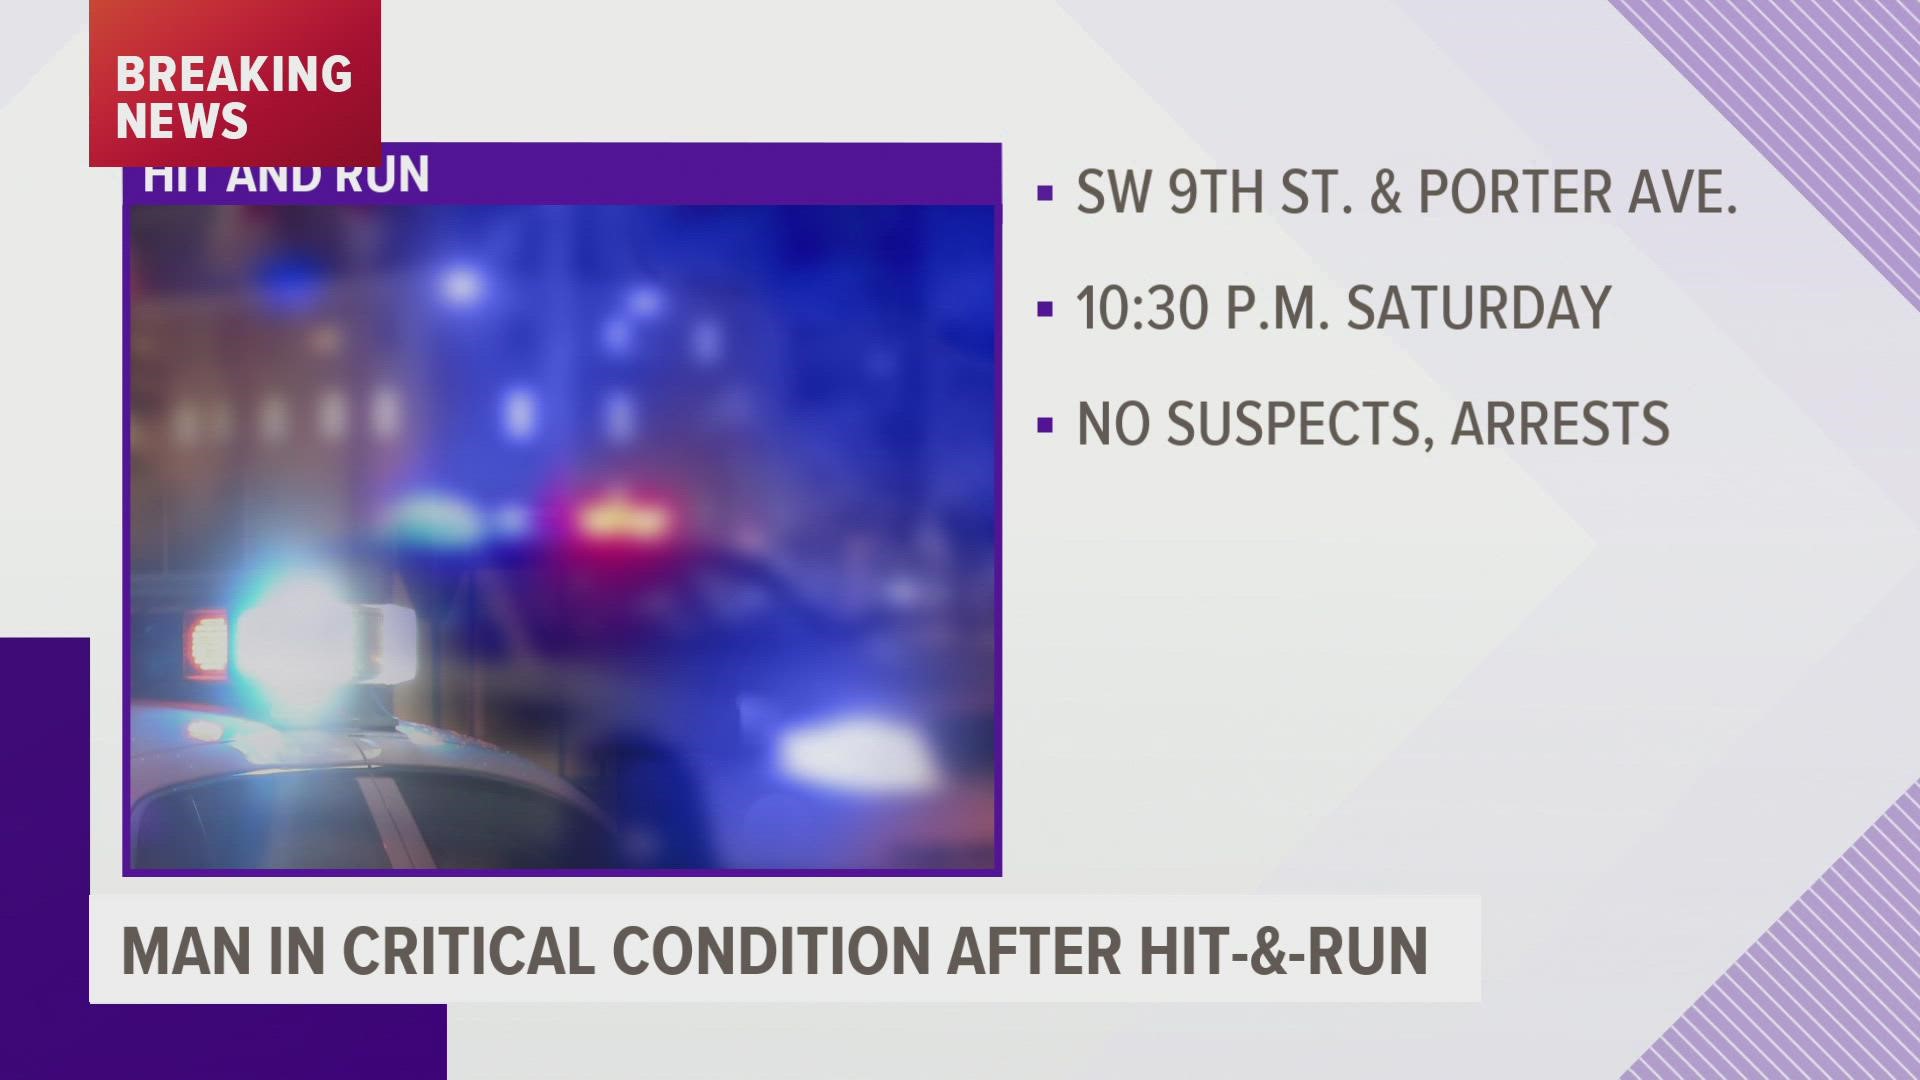 A 35-year-old man is in critical condition after a hit-and-run near Southwest 9th Street and Porter Avenue.